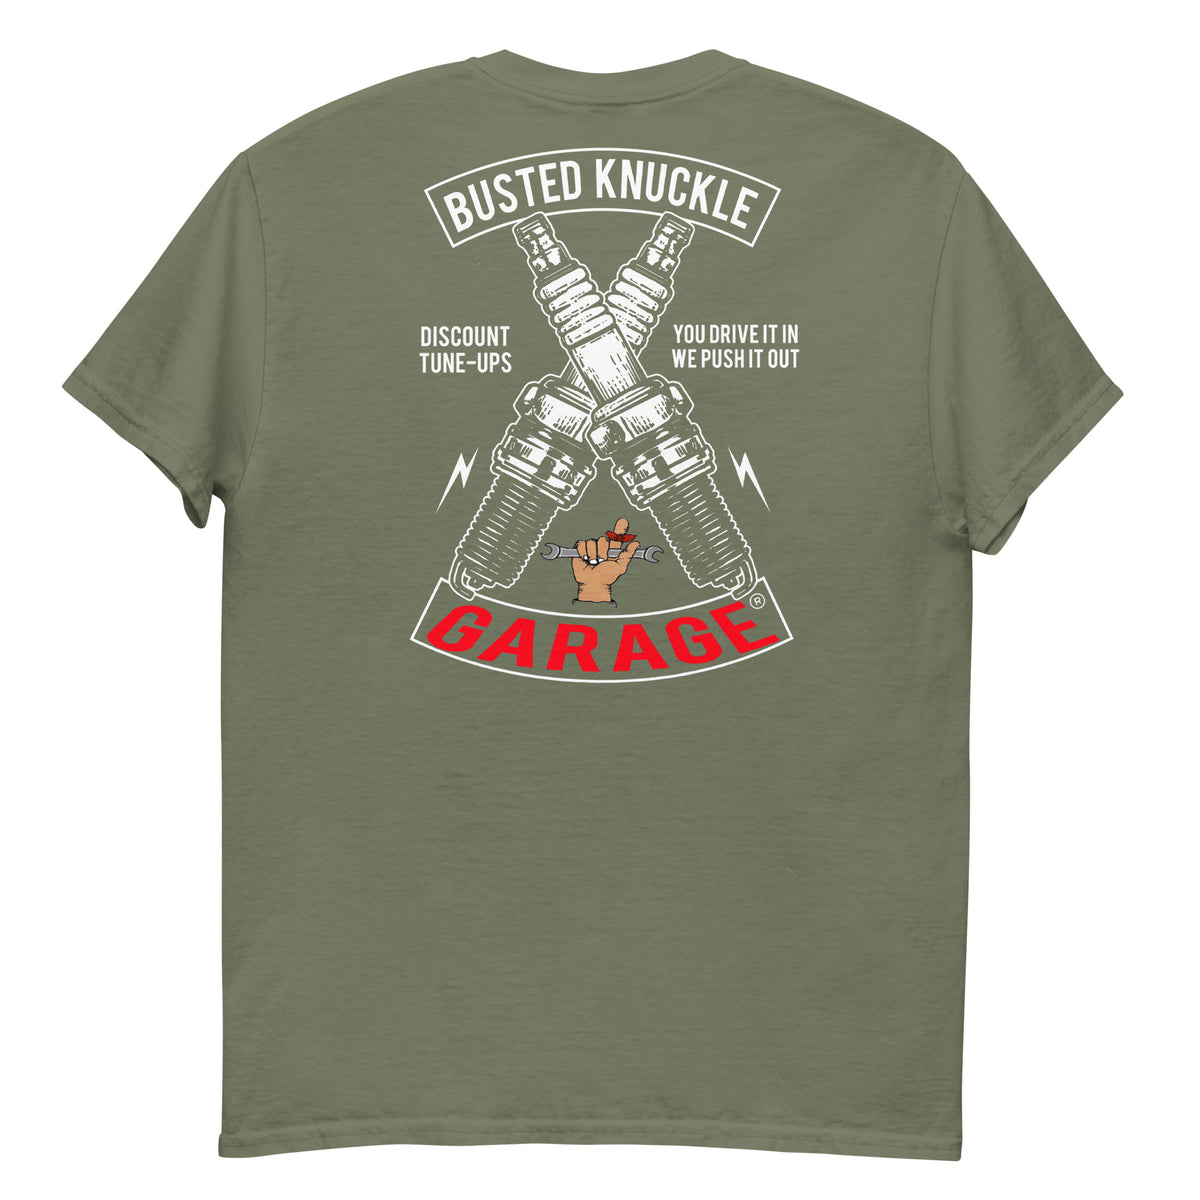 Busted Knuckle Garage Carguy Two Sided Tune-Up T-Shirt